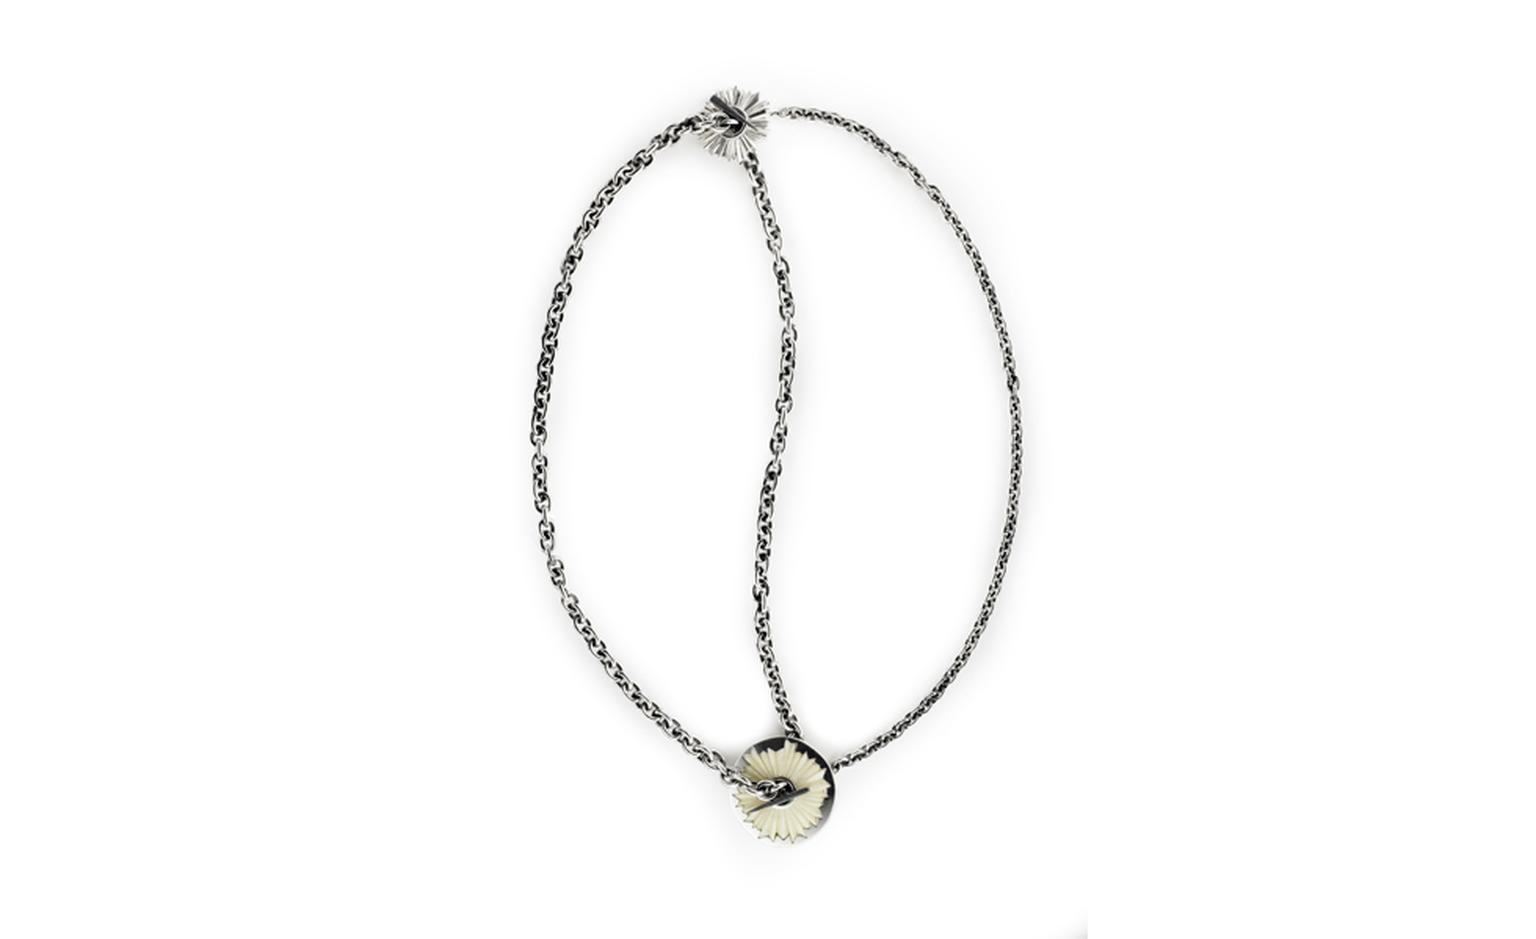 Albion Trinketry, Tri Chain Necklace, Mammoth tusk in silver by Pete Doherty and Hannah Martin £1915